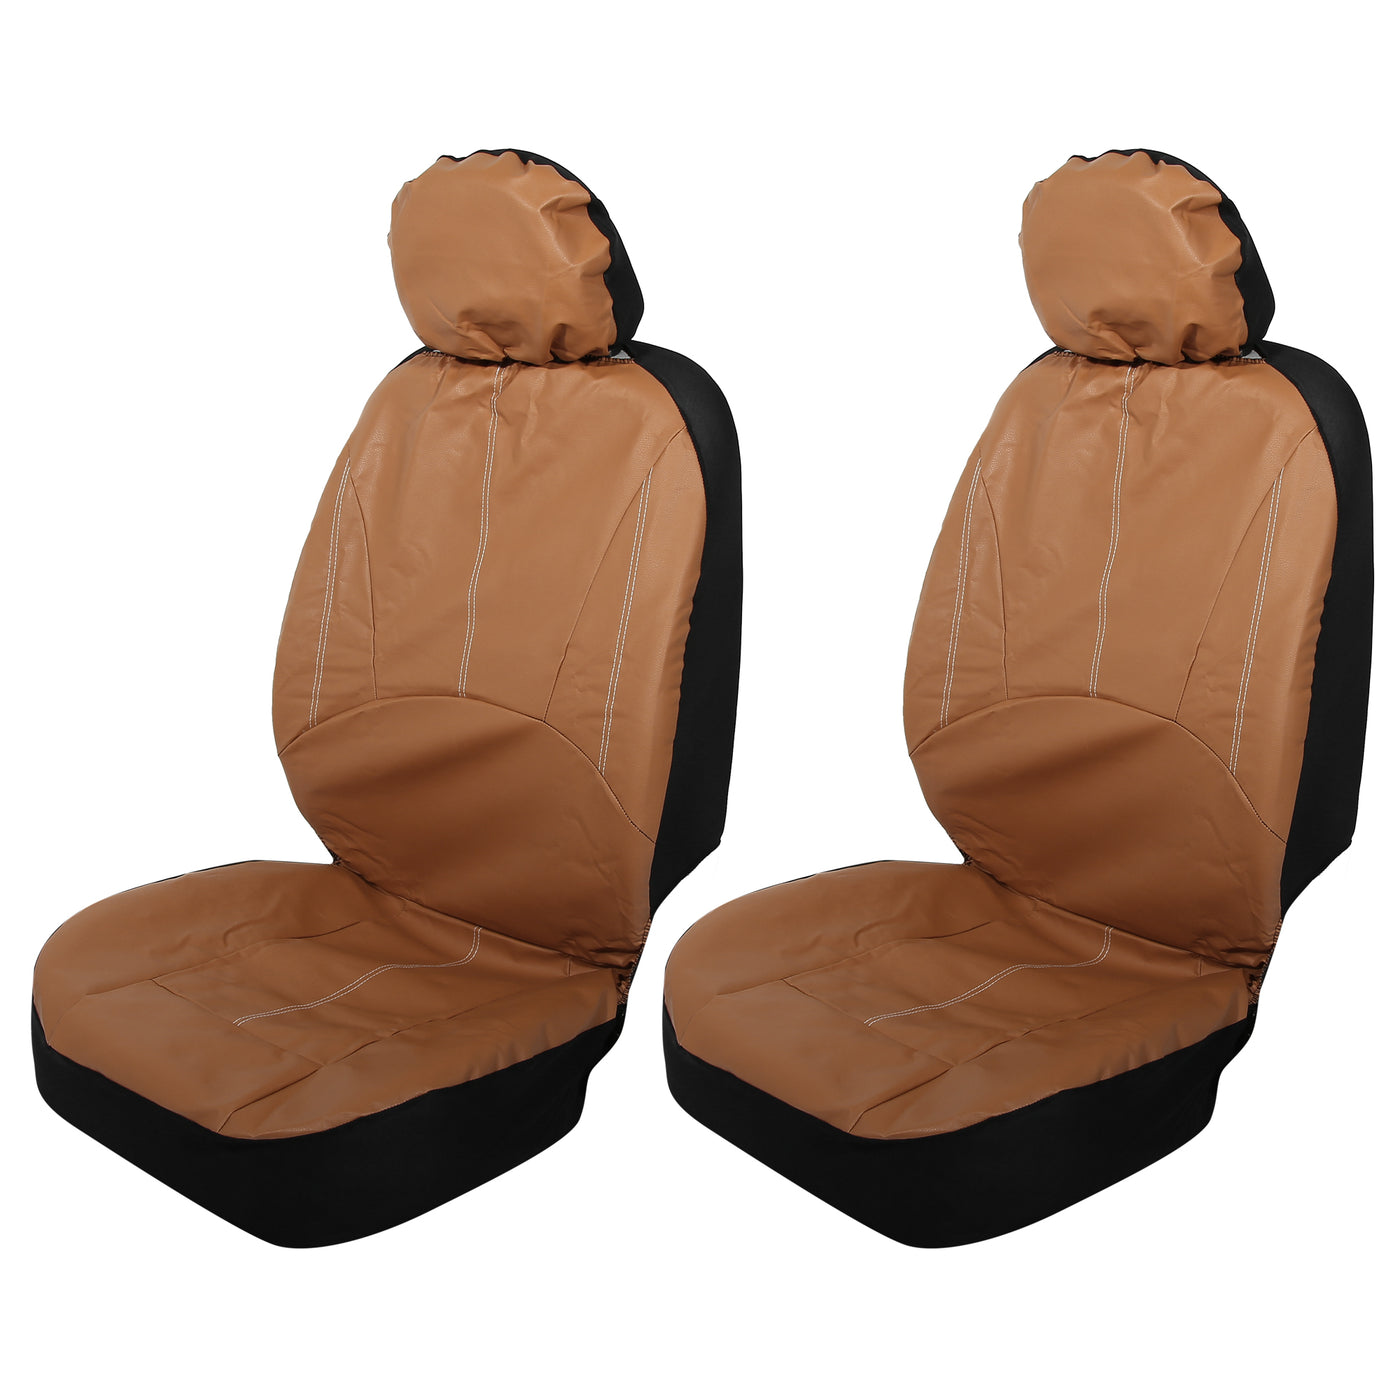 X AUTOHAUX 4pcs Front Seat Covers Protector PU Leather Seat Cover Protector Pad Universal for Car Truck SUV